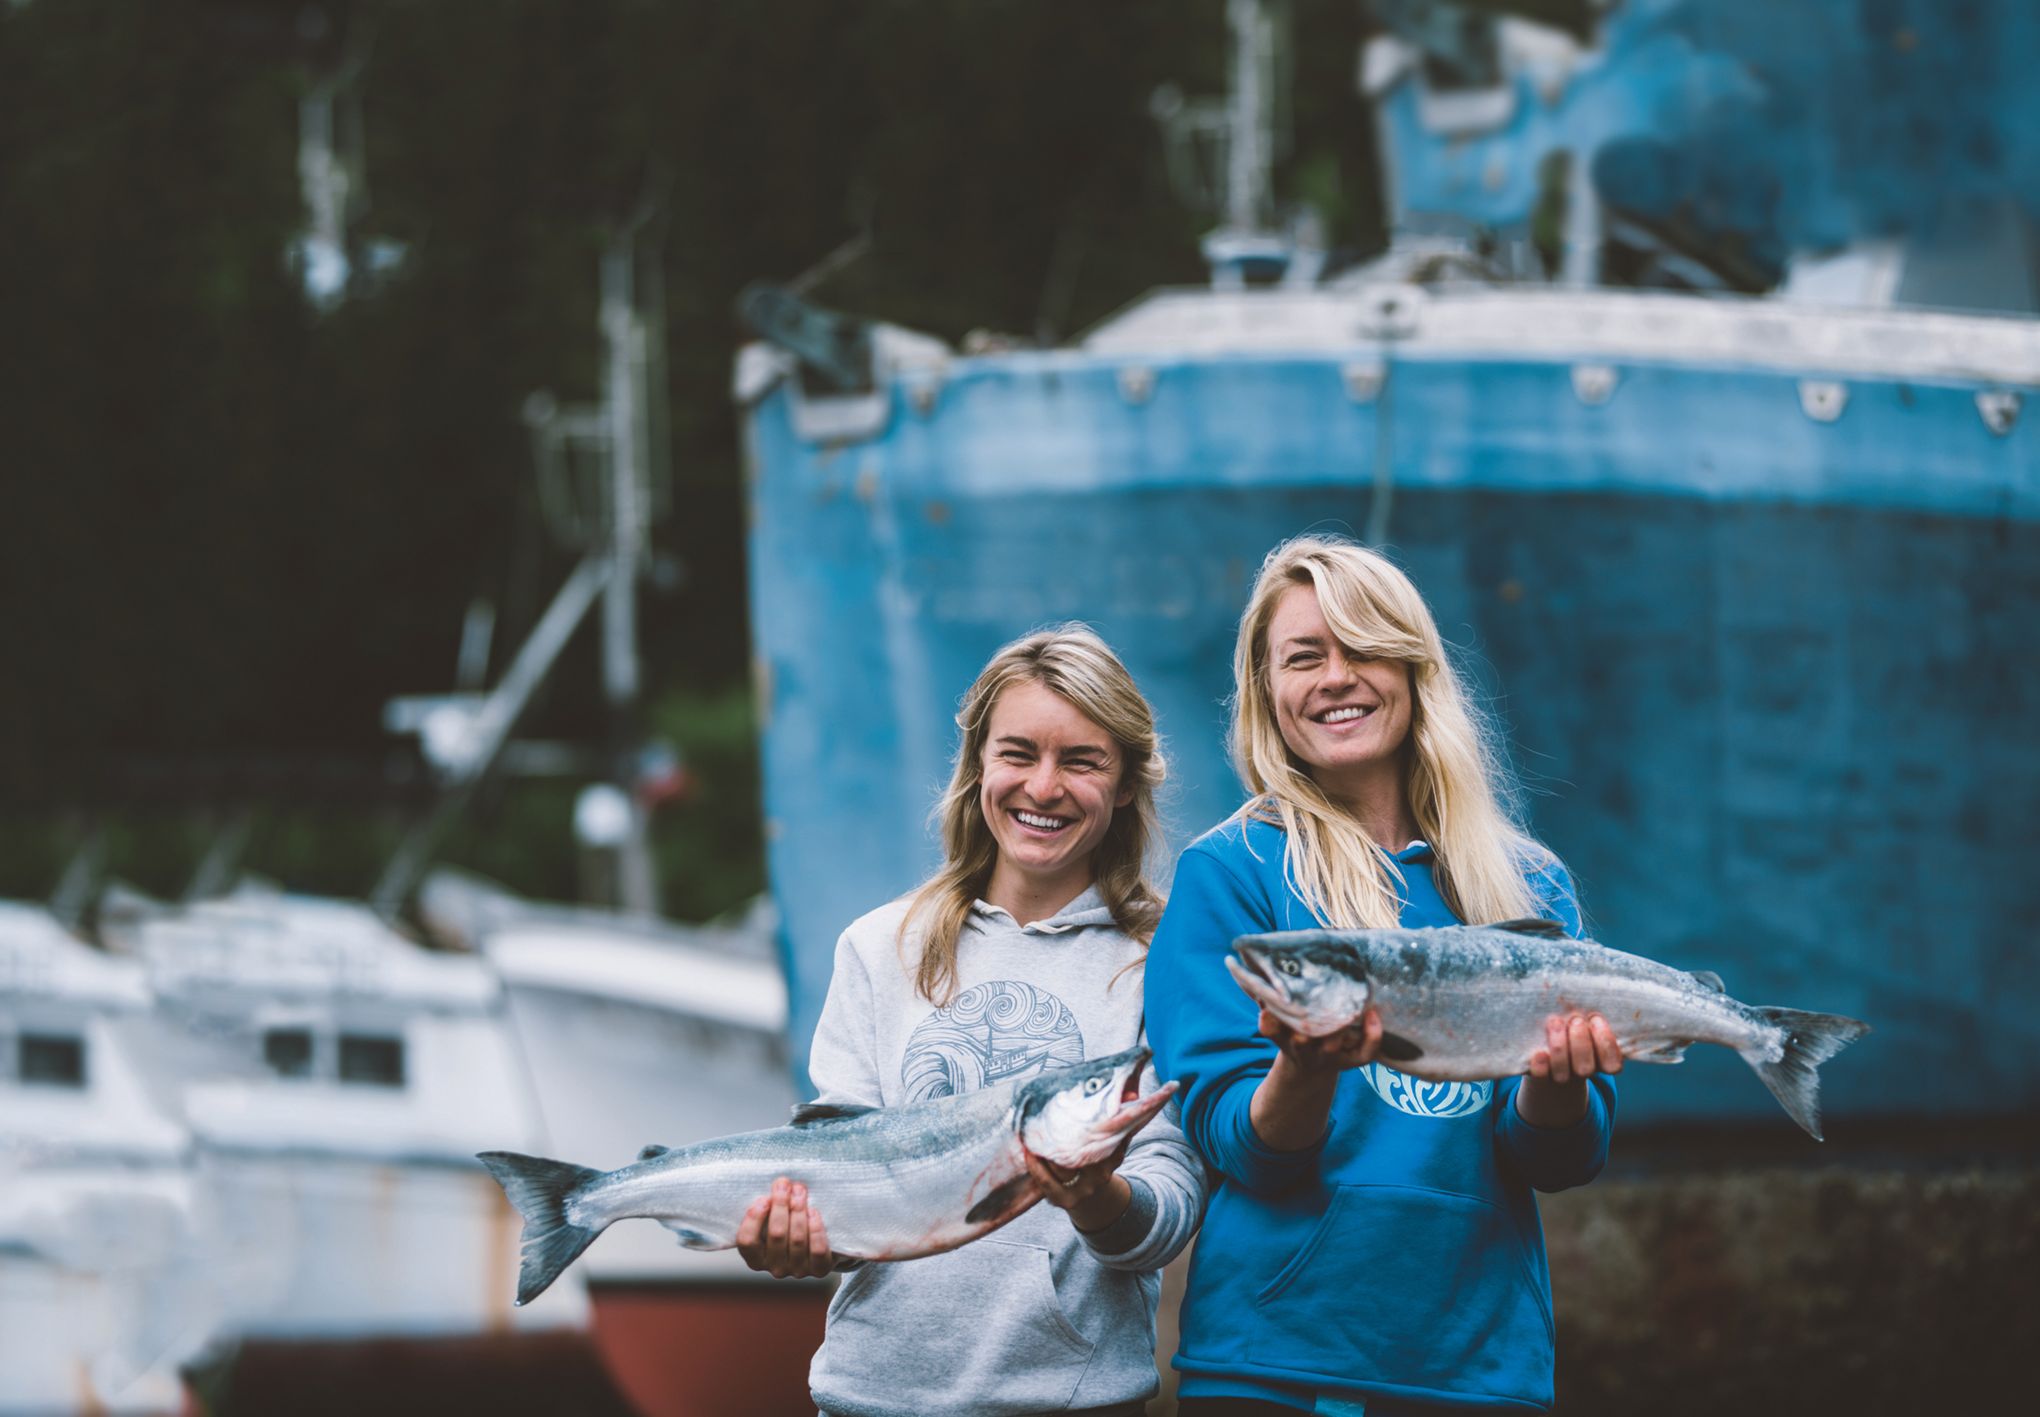 The Salmon Sisters' share how growing up on a remote Alaskan